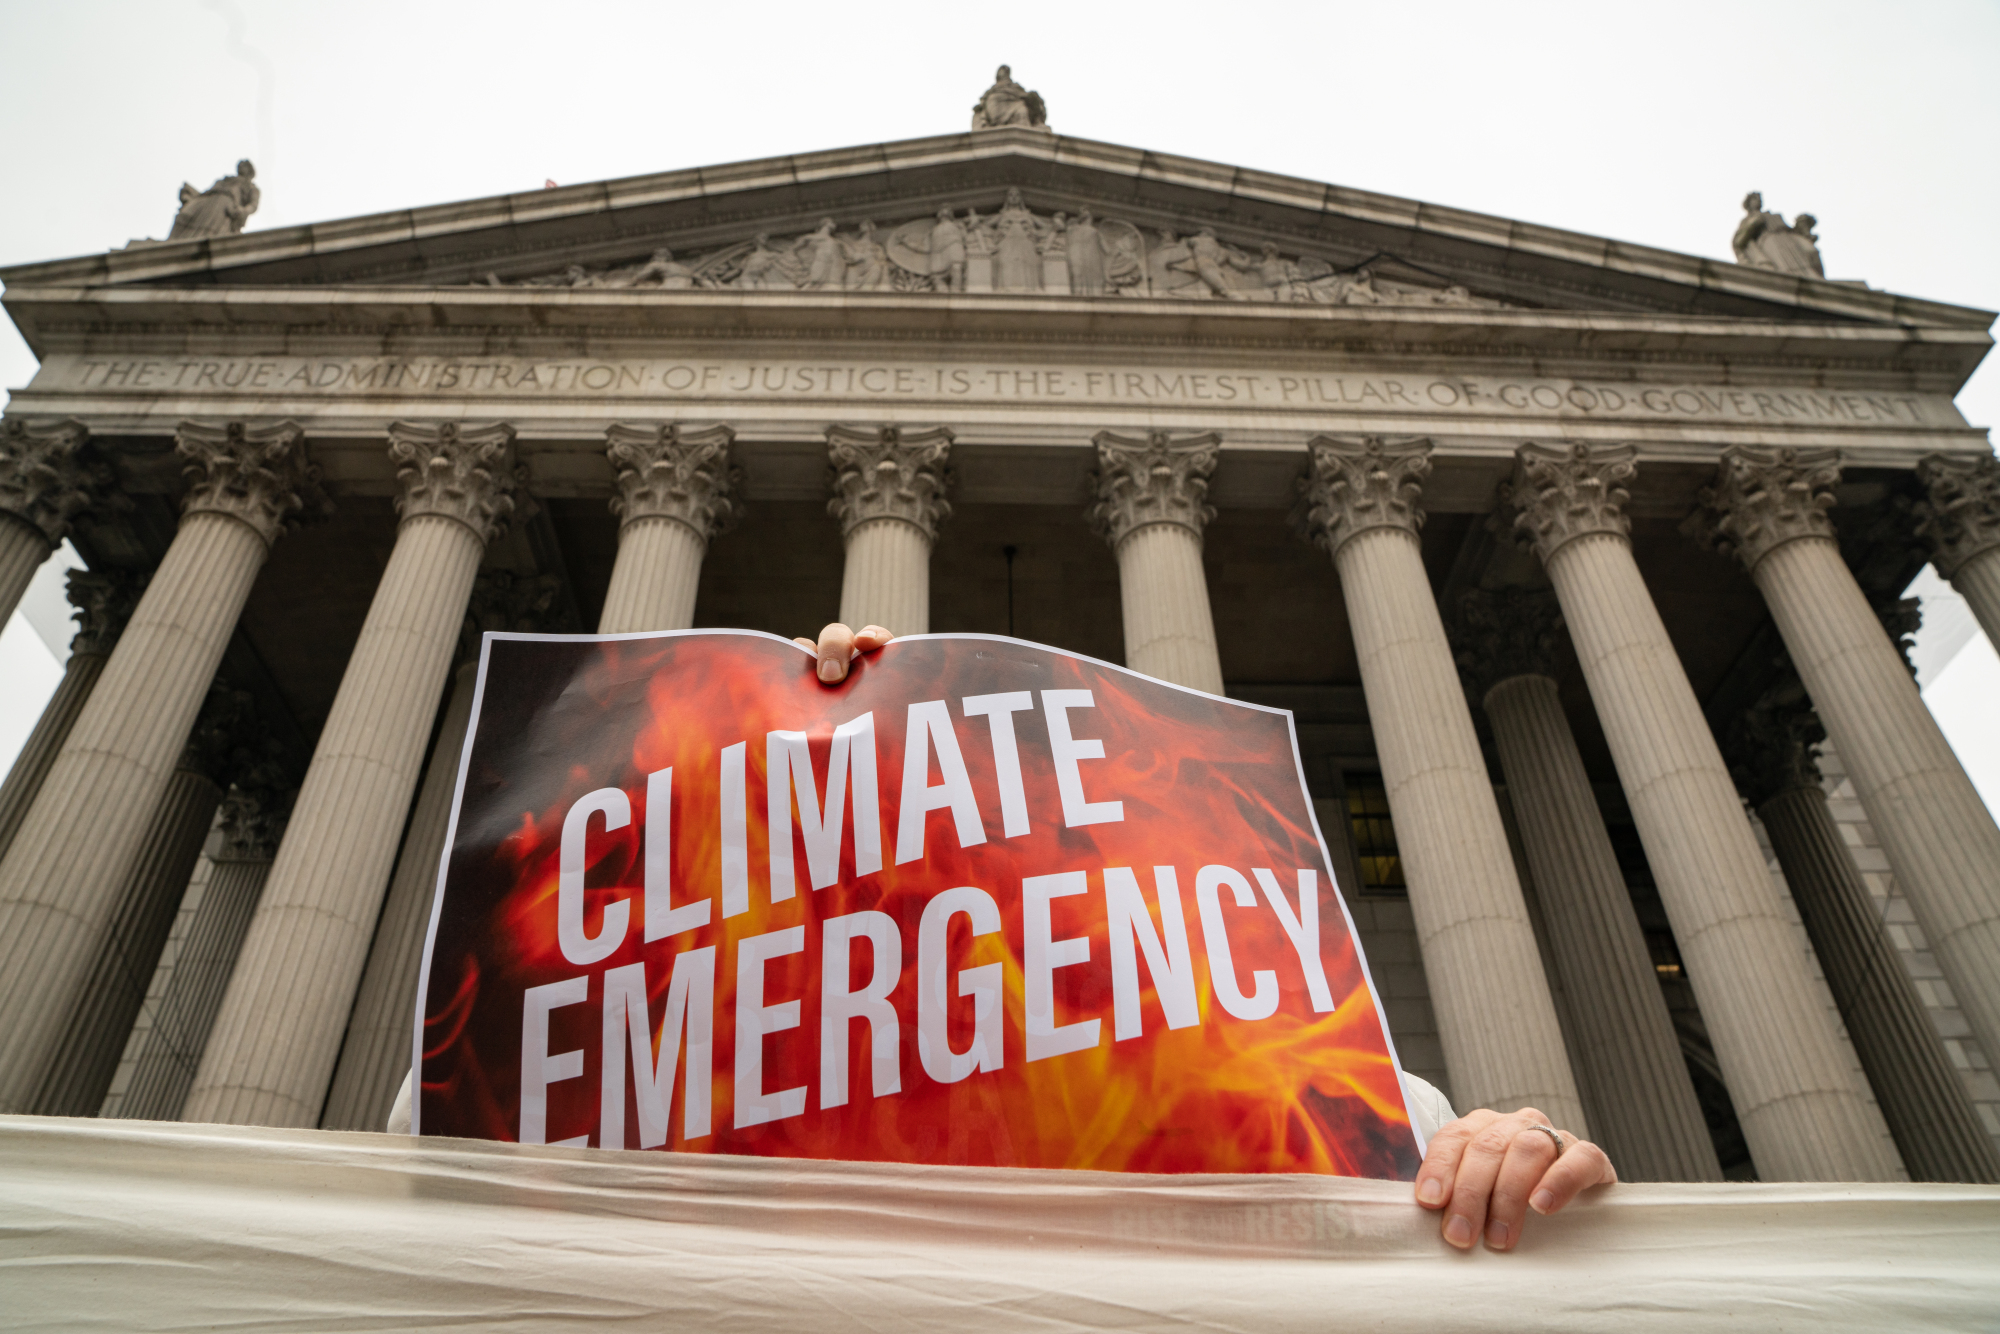 A demonstrator holds a sign at a protest on the first day of the ExxonMobil Corp. trial outside the New York State Supreme Court building on Tuesday. | BLOOMBERG